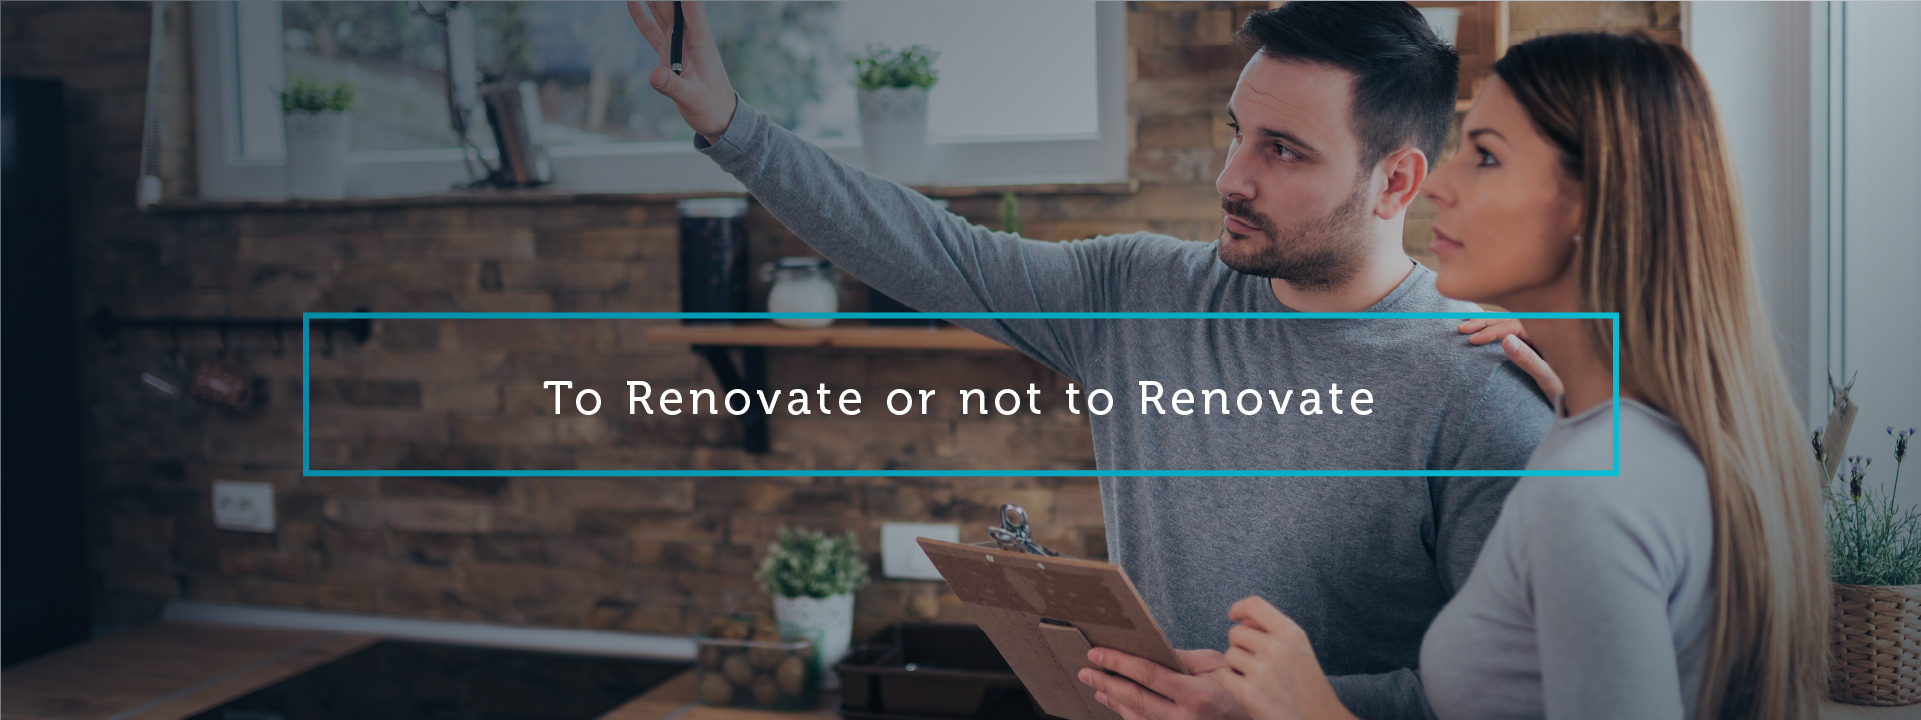 To renovate or not to renovate